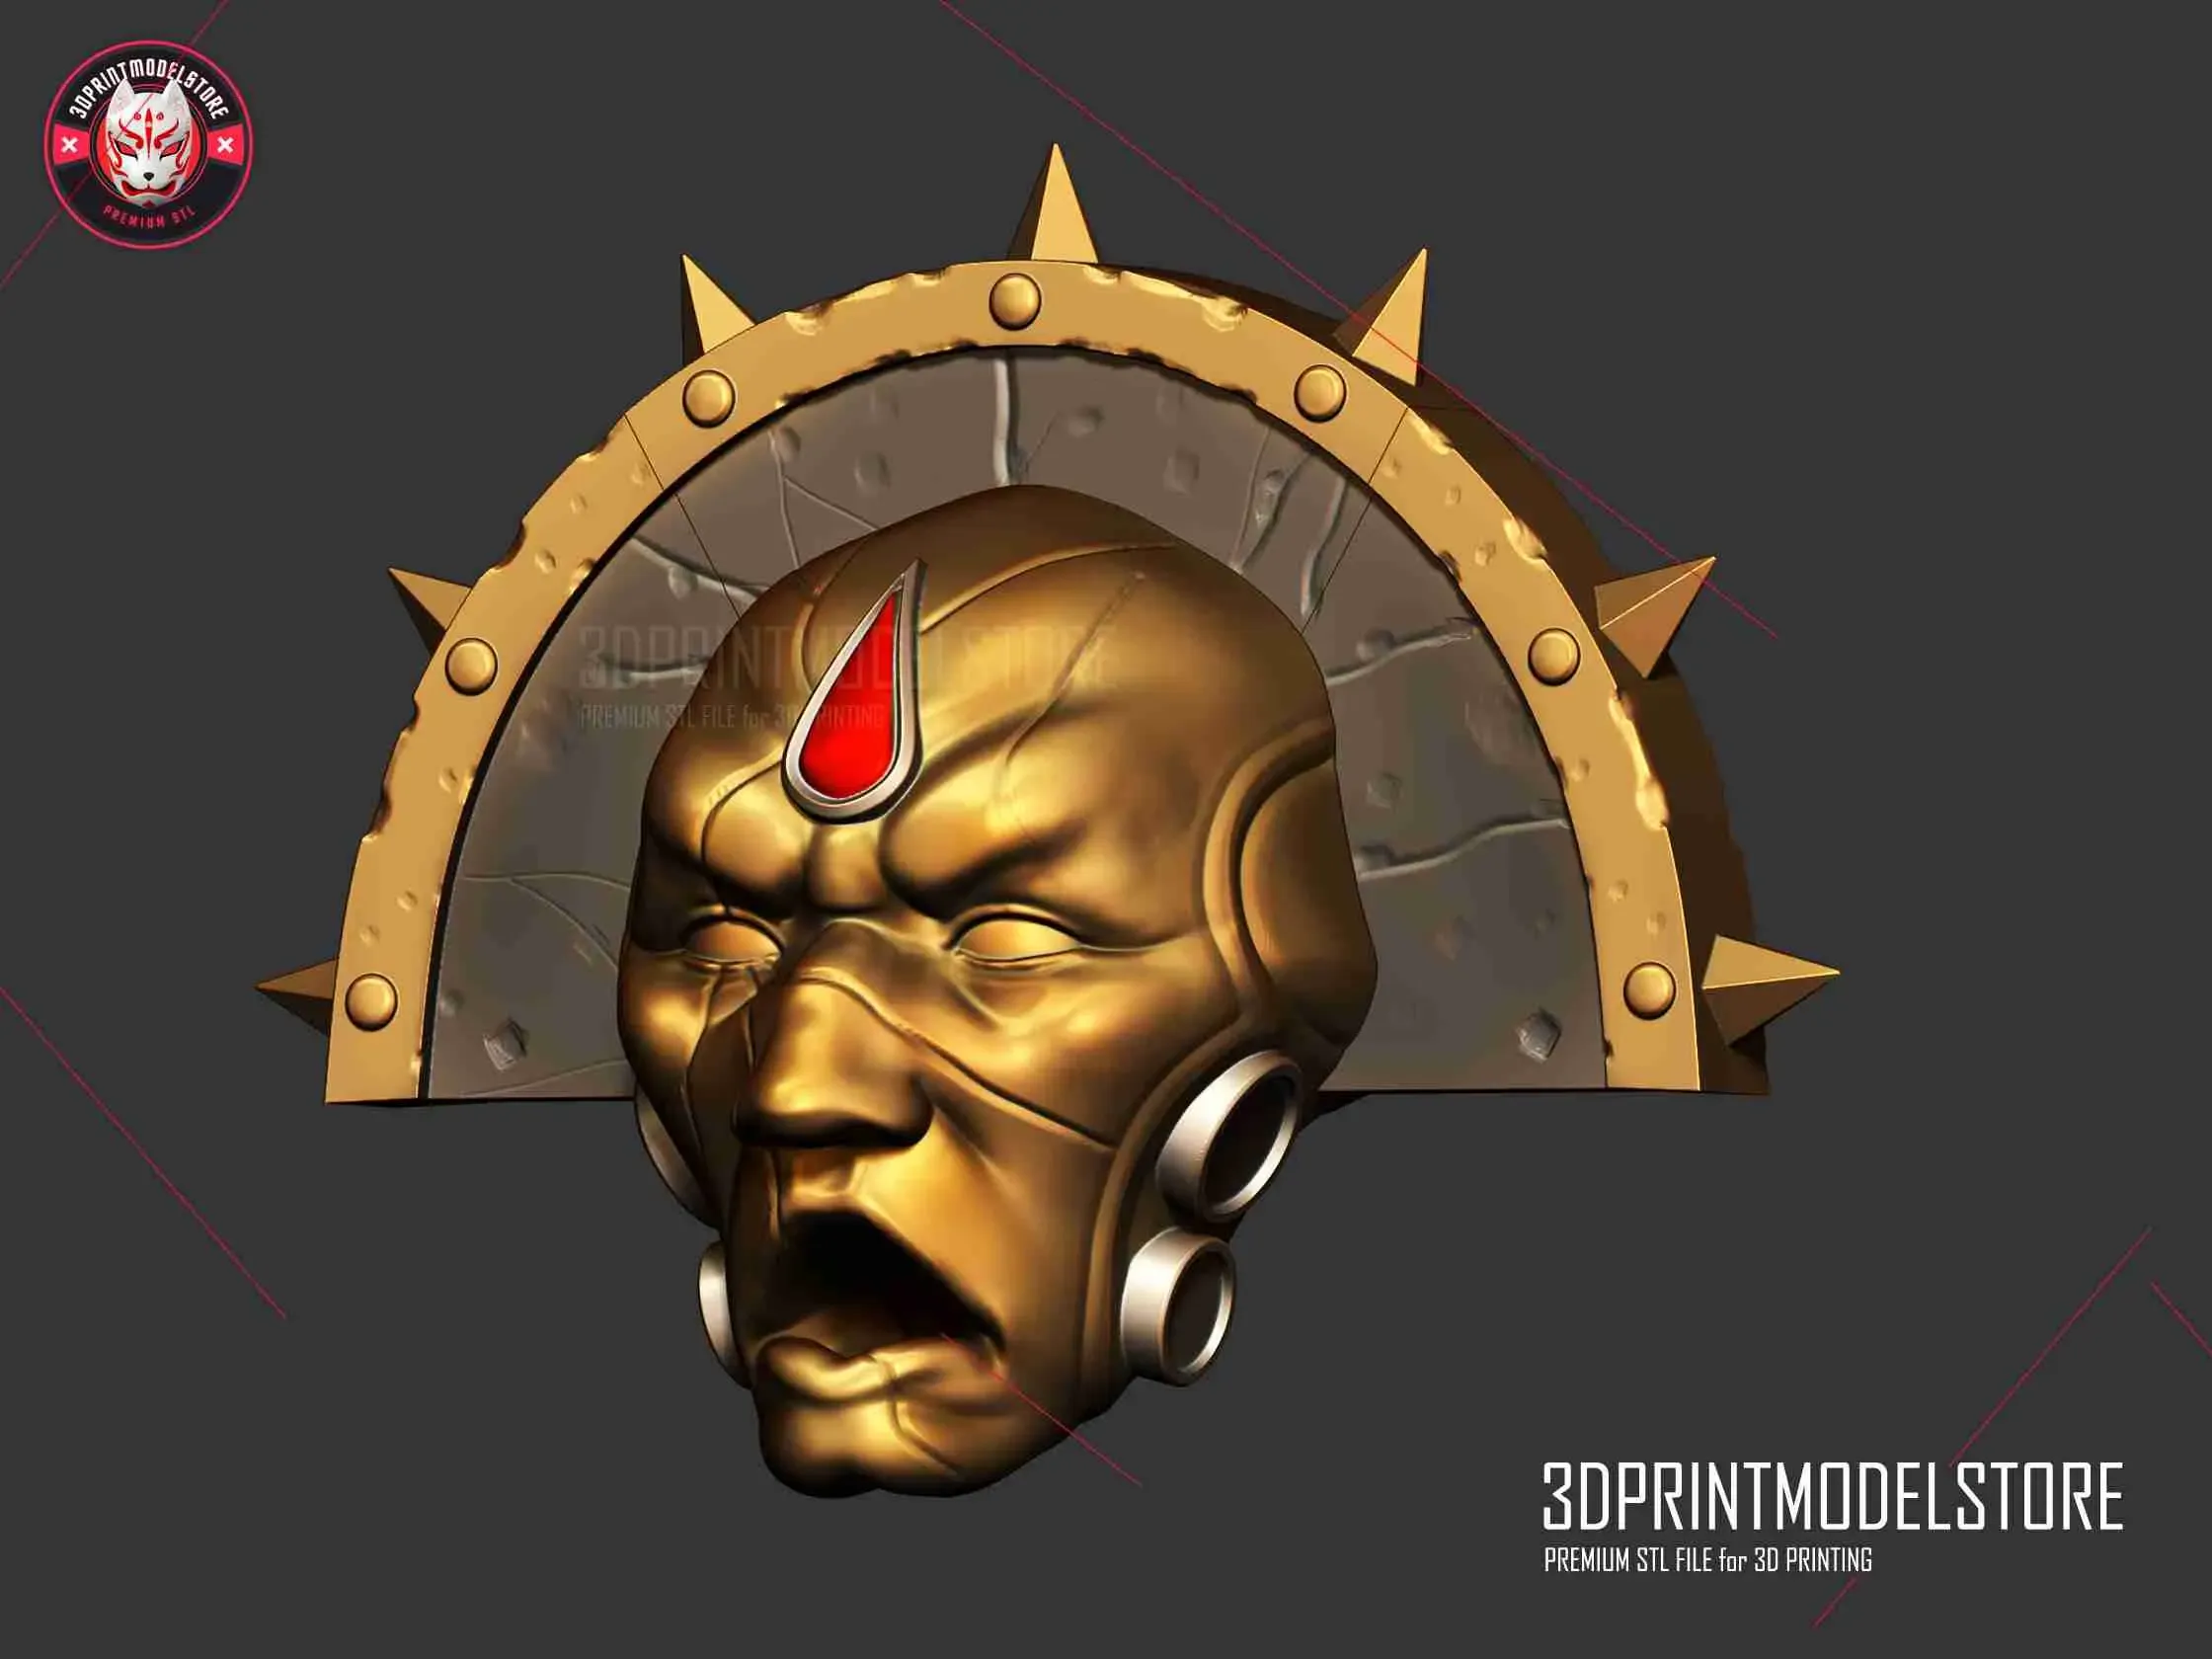 The Death Mask of Sanguinius Warhammer 40K Lord Commander